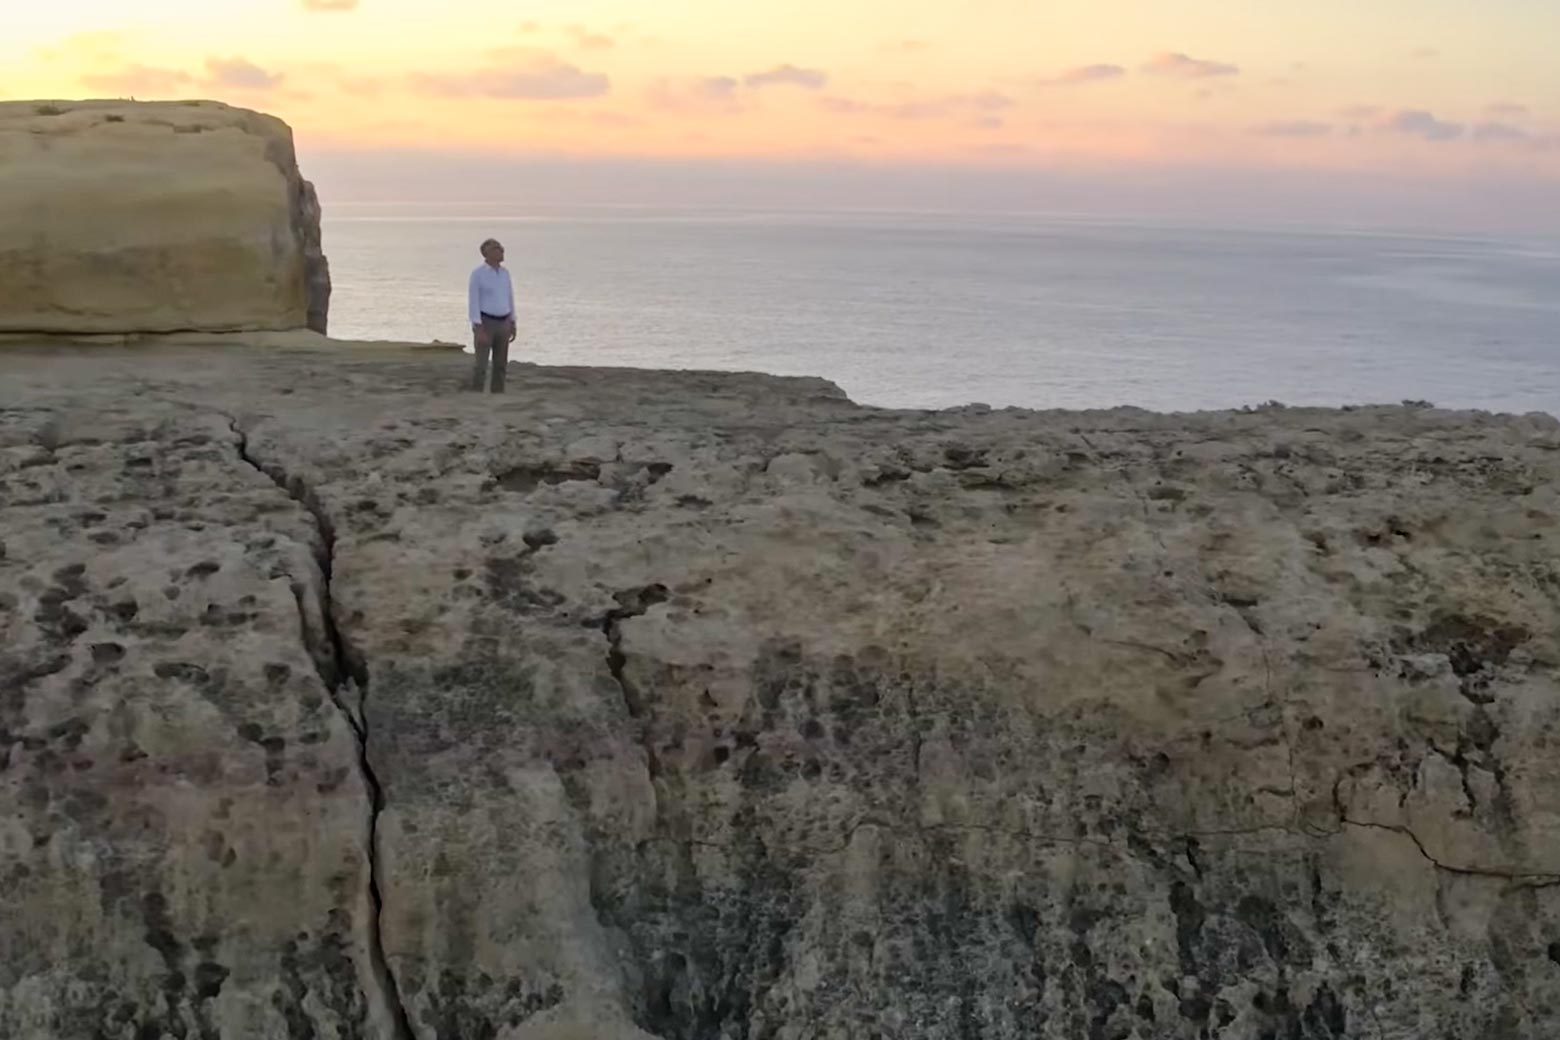 Journalist Graham Hancock, wearing a white shirt, stands on top of a rock formation at sunrise.